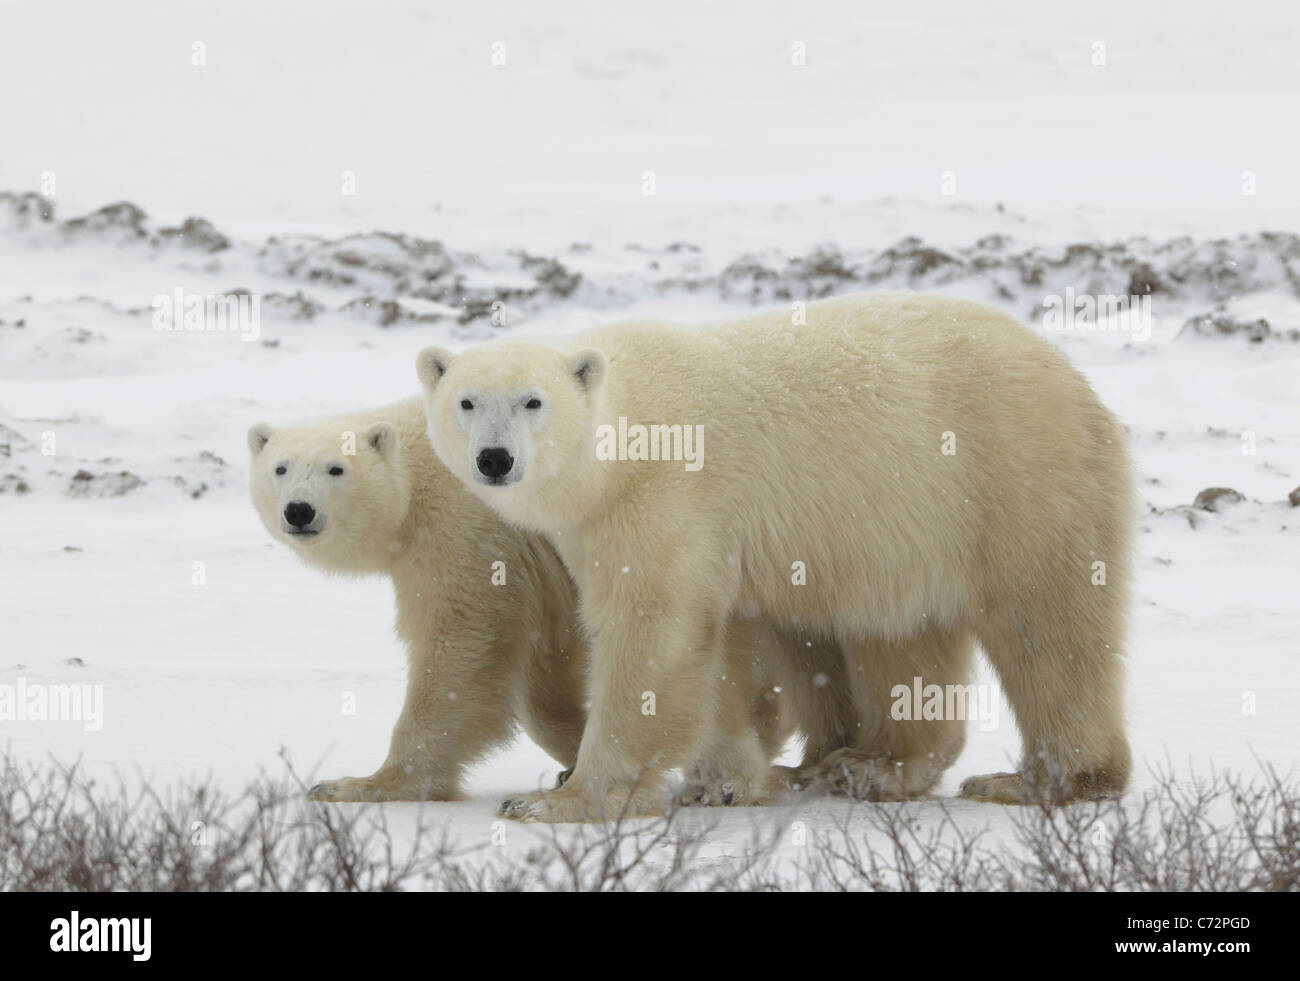 Couple. Polar bears have become interested. Snow-covered tundra. It is snowing. Stock Photo